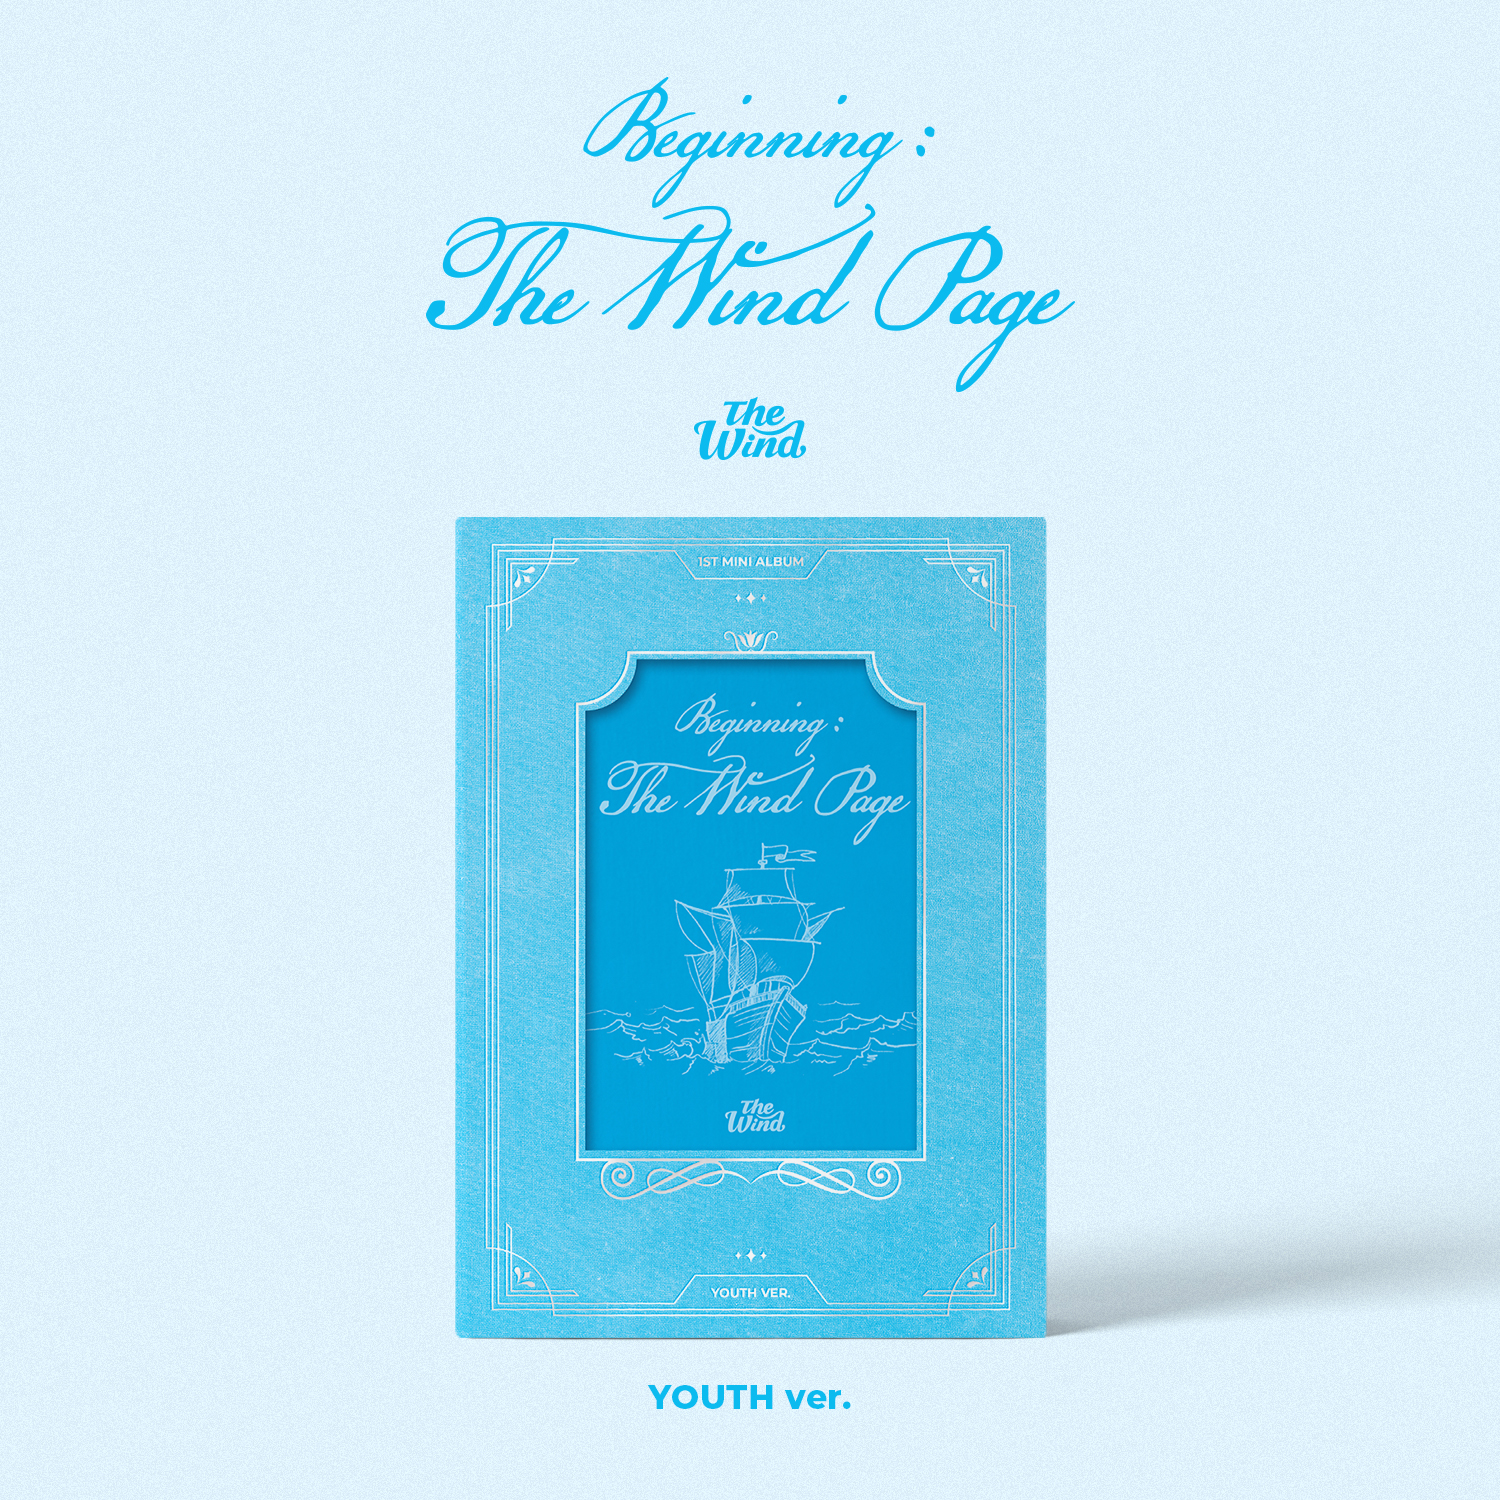 The Wind - 1st Mini Album [Beginning : The Wind Page] (YOUTH Ver.)